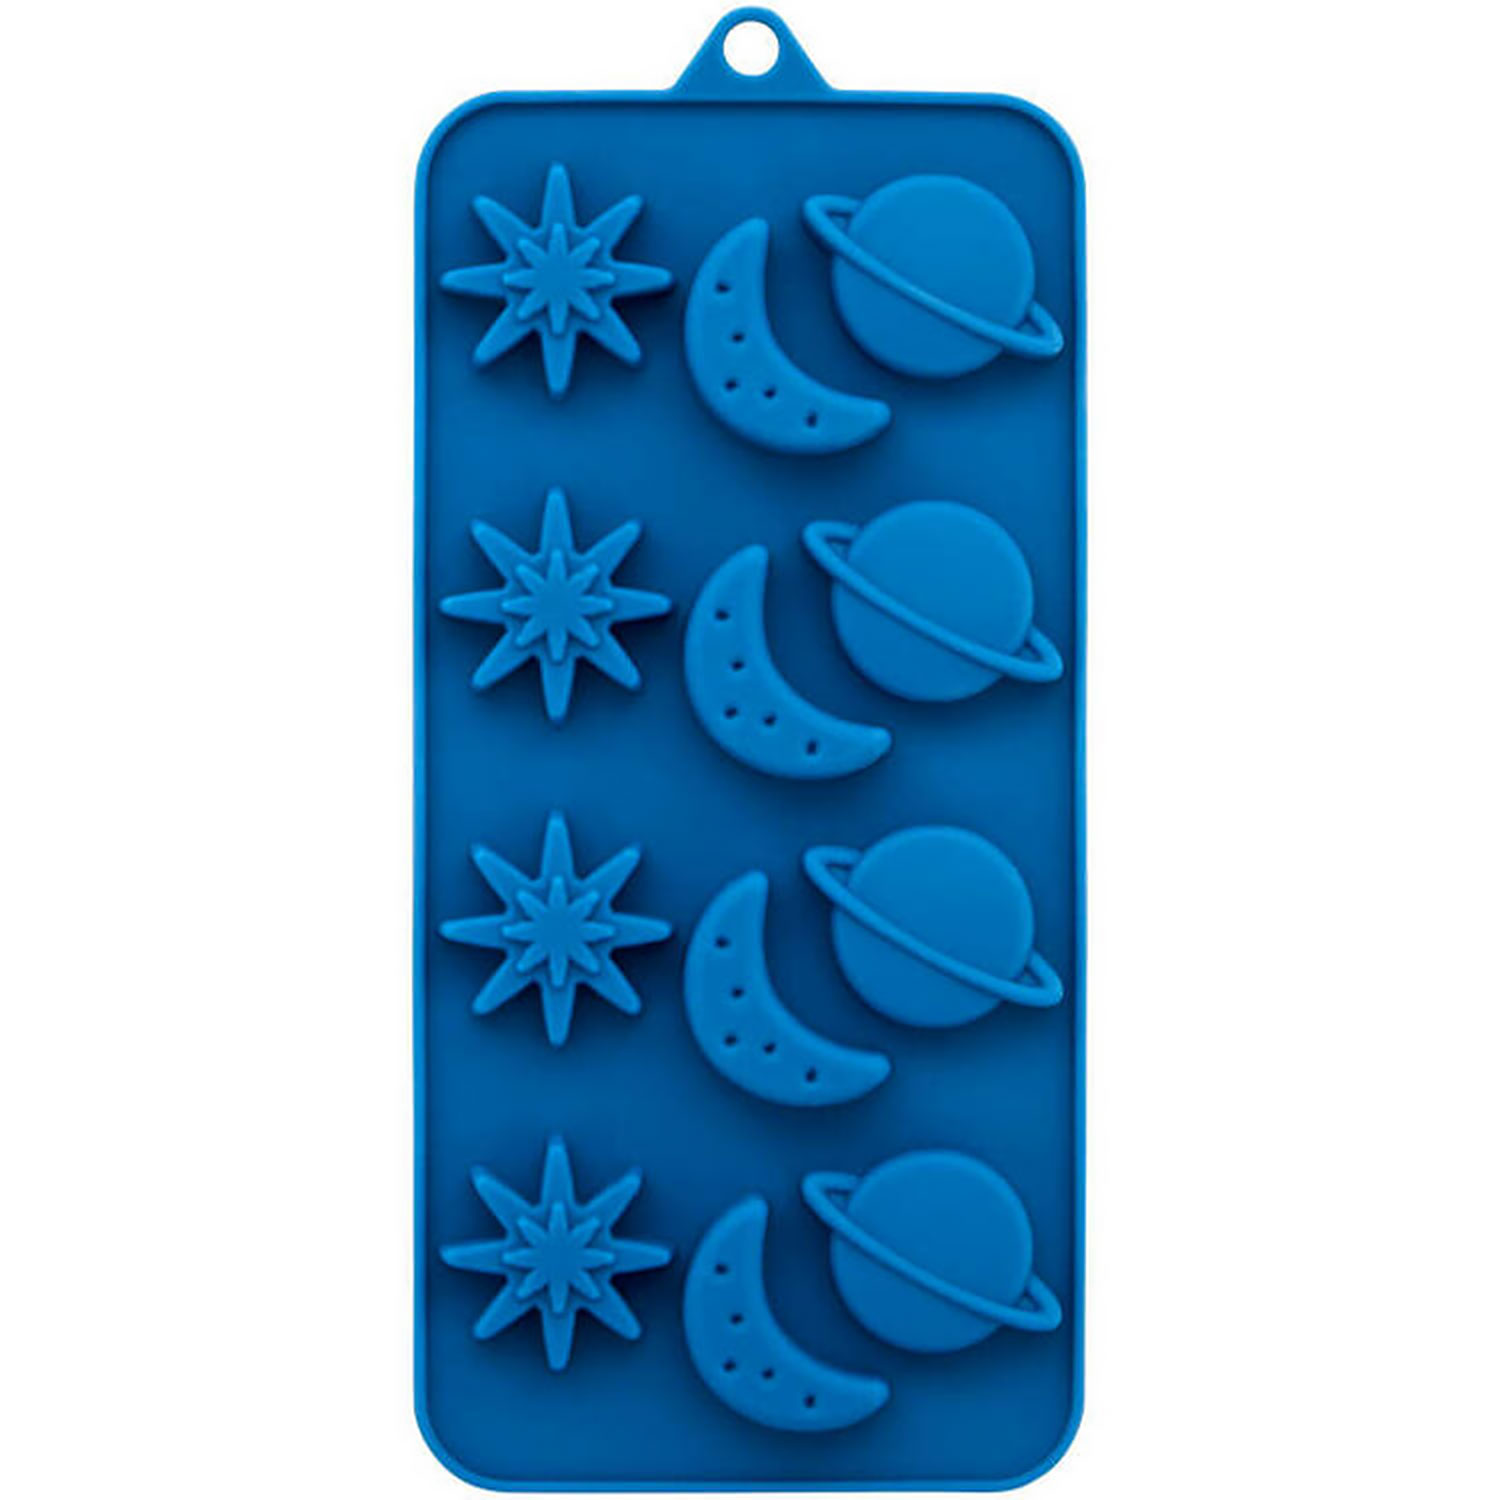 Wilton Planet, Moon and Star Silicone Candy Mold, 12-Cavity